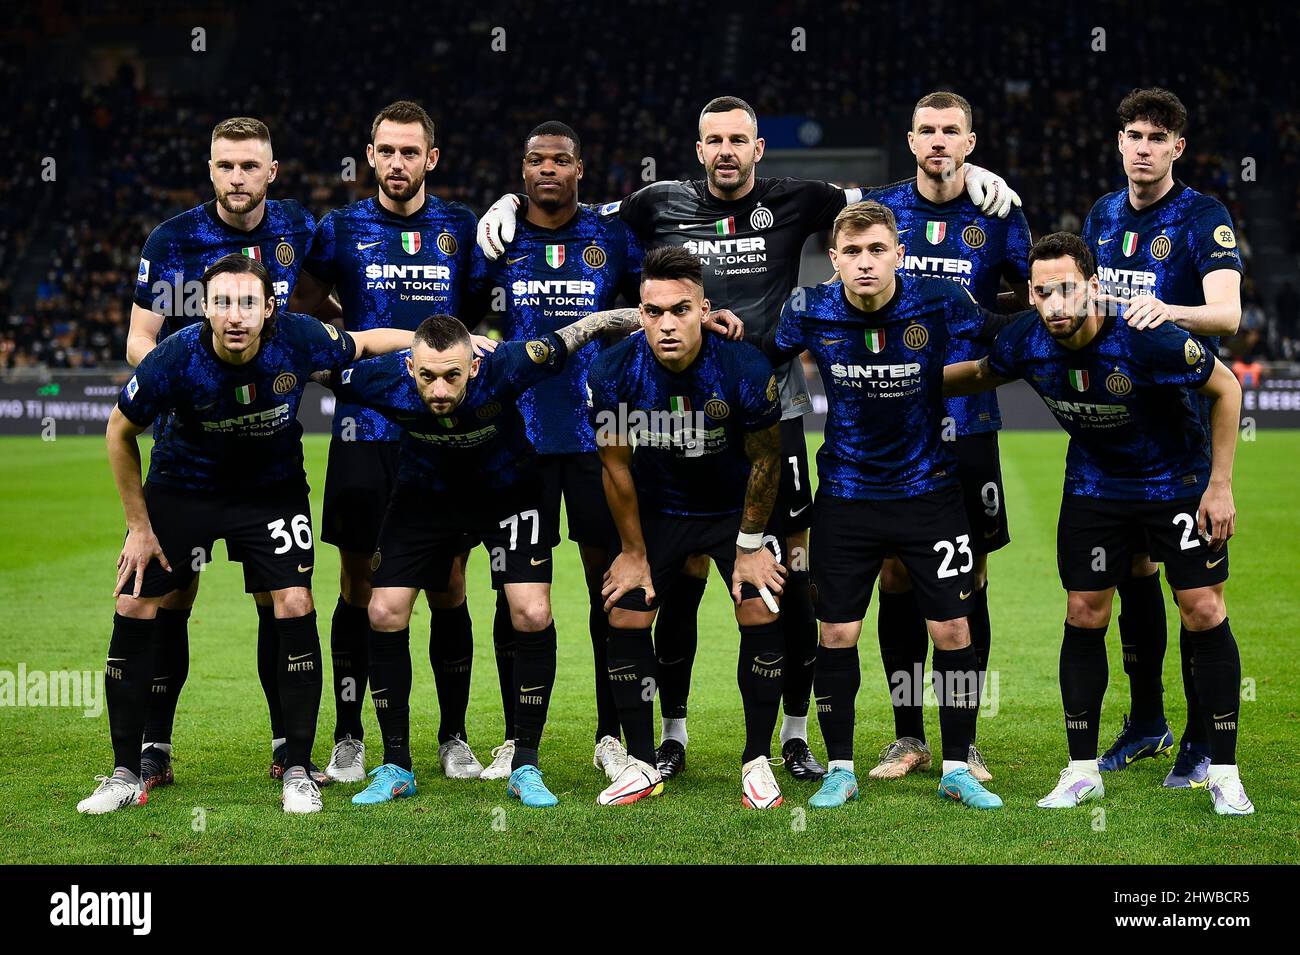 Milan, Italy. 04 March 2022. Players of FC Internazionale pose for a team photo prior to the Serie A football match between FC Internazionale and US Salernitana. Credit: Nicolò Campo/Alamy Live News Stock Photo